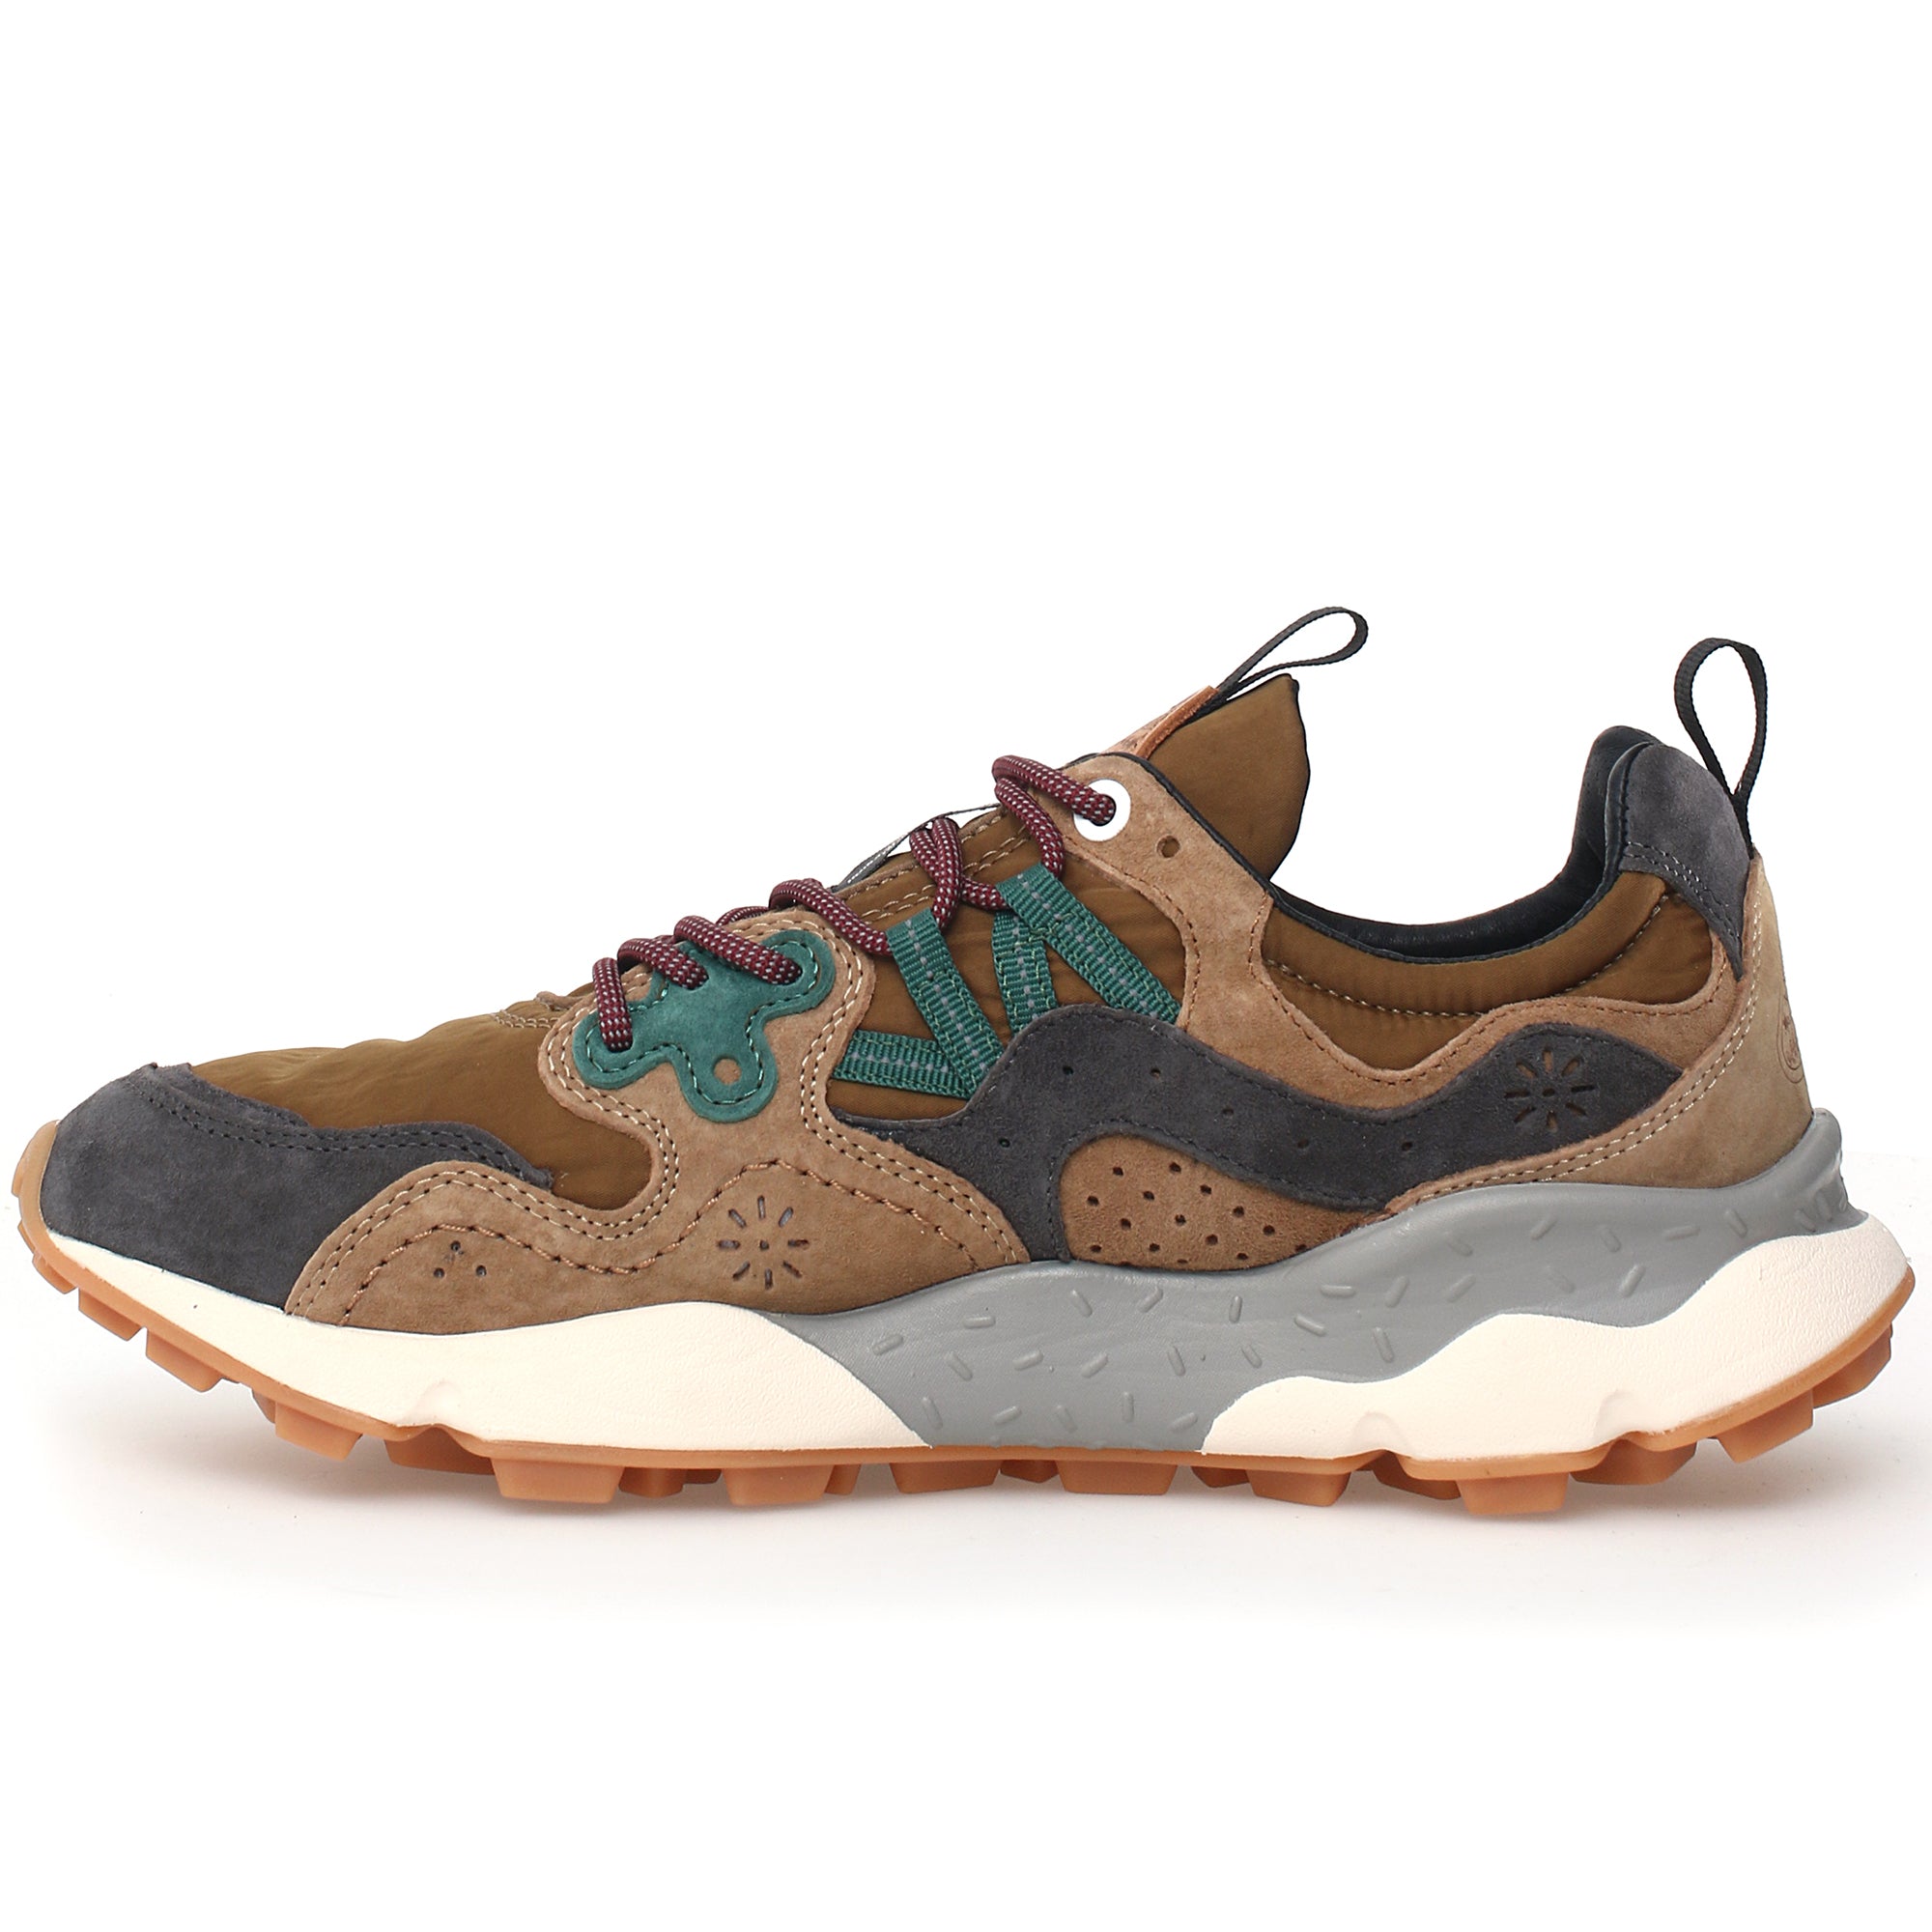 Flower Mountain Yamano 3 Trainers - Grey/Olive